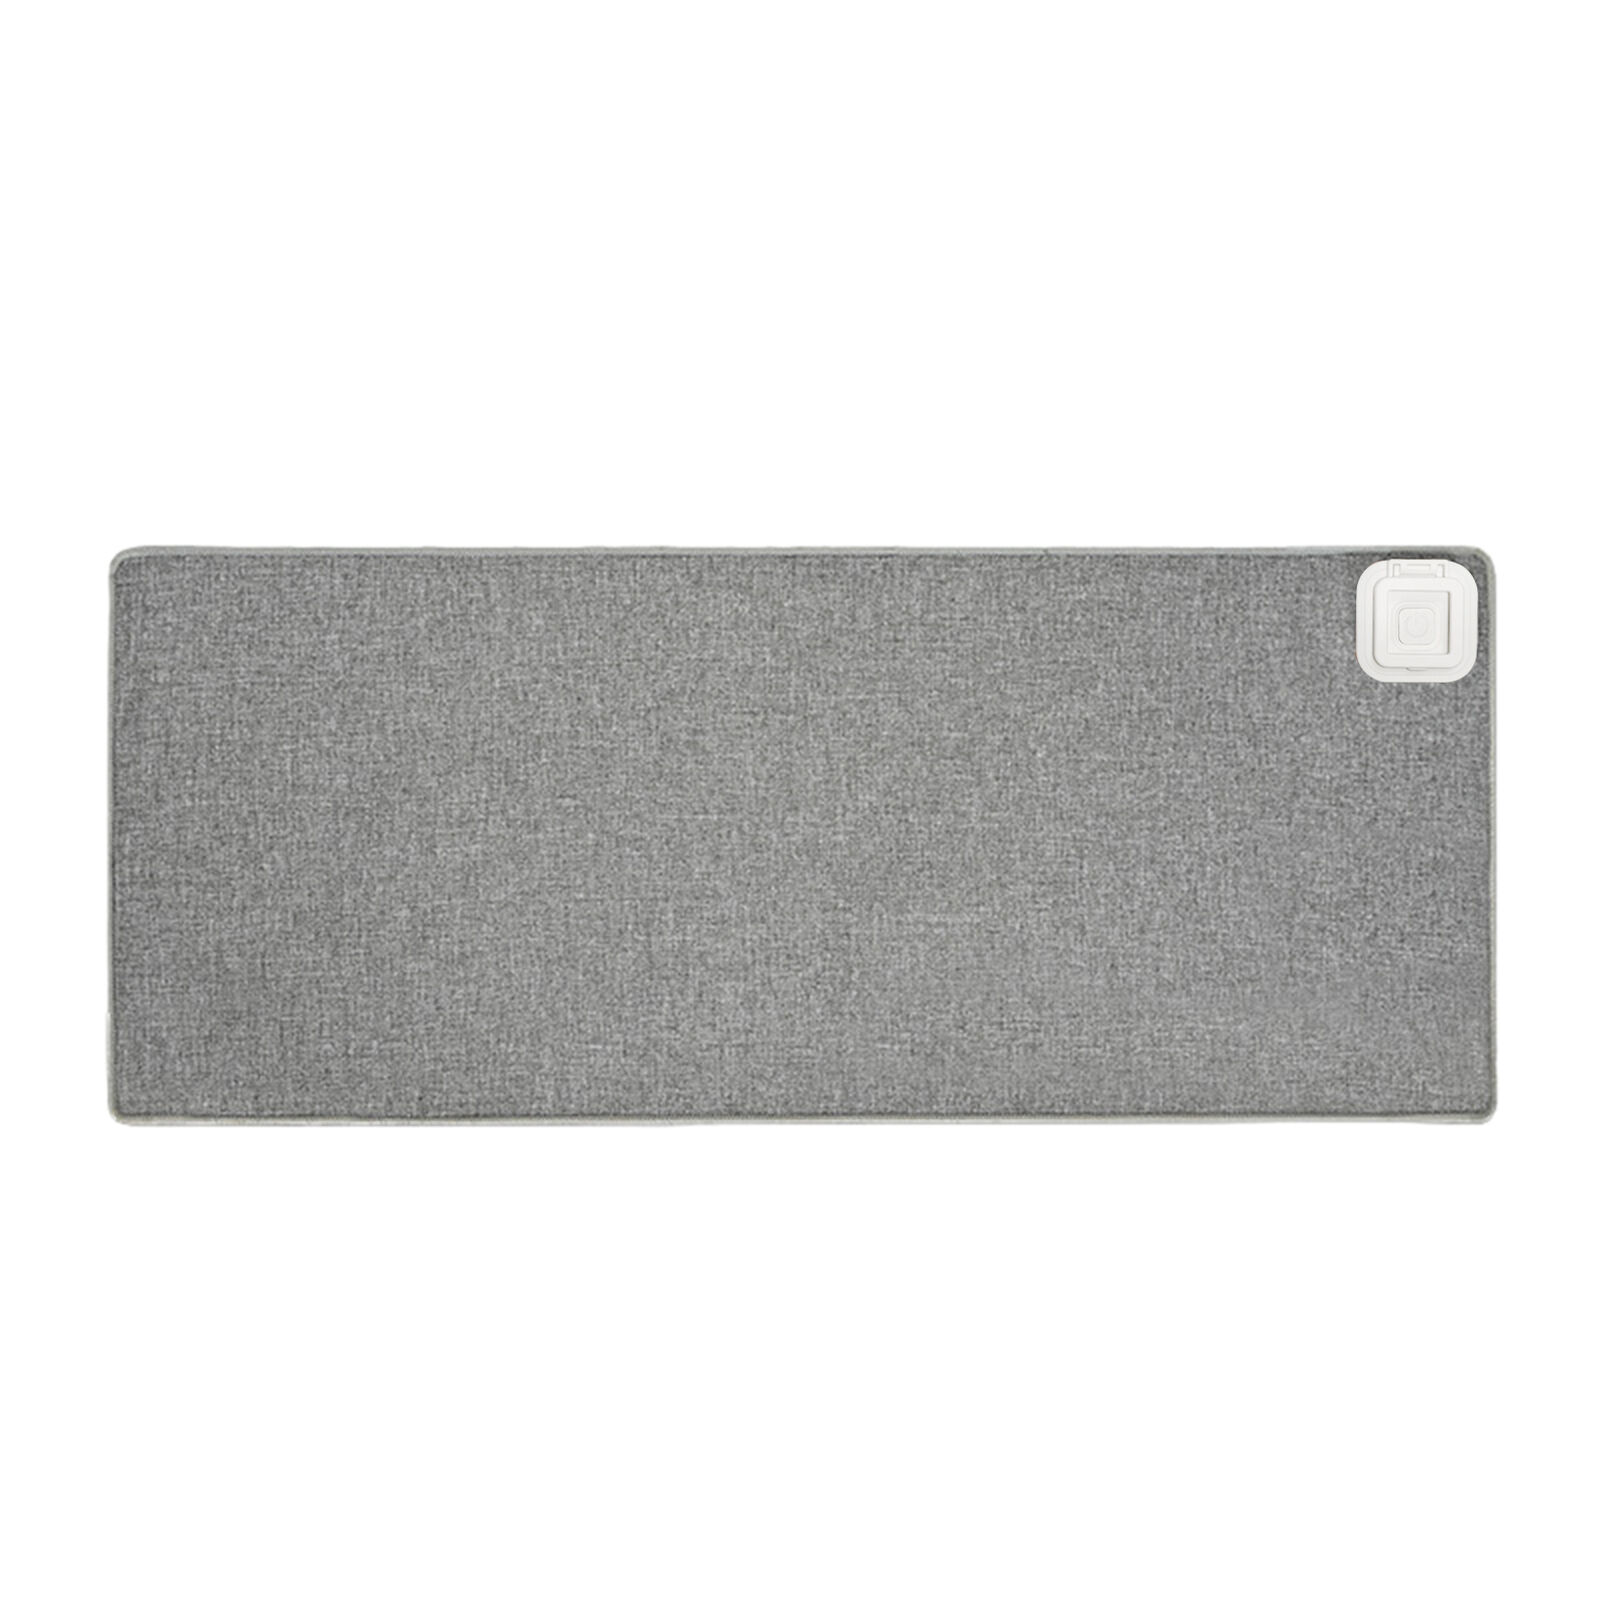 Heated Mouse Pad Winter Hand Warmer Computer Desk Heated Pad Large